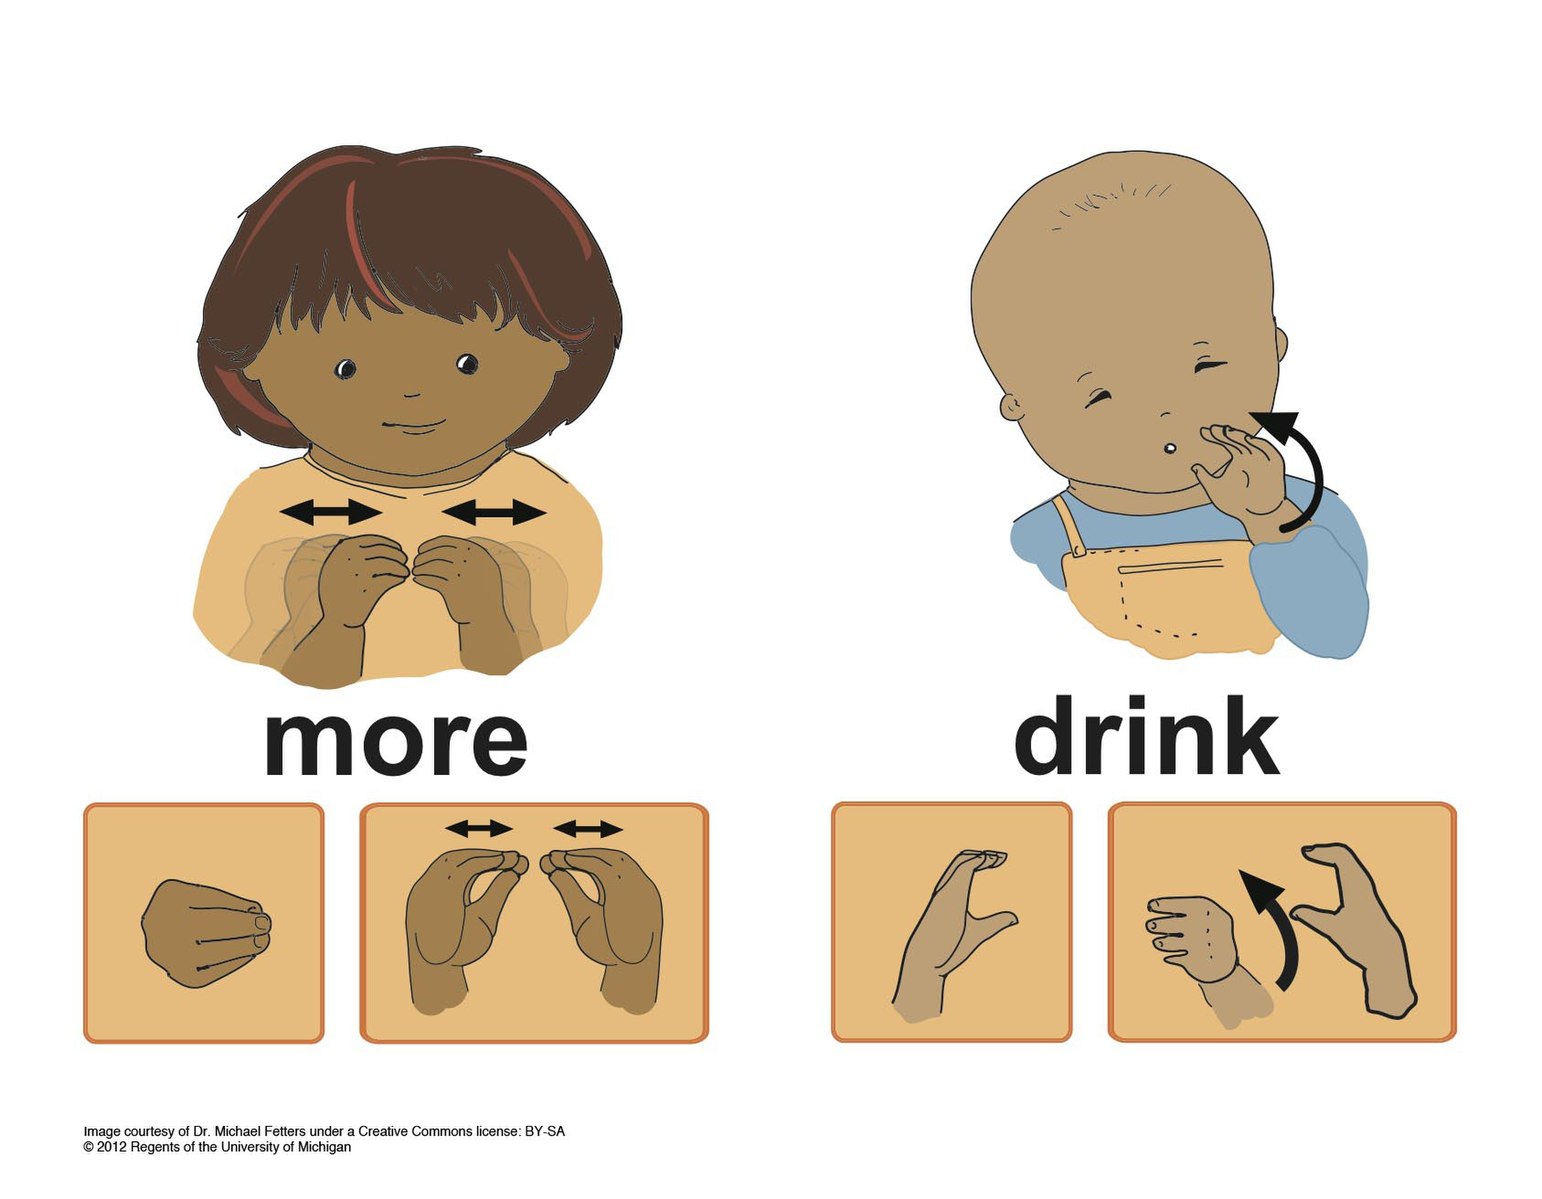 Girl gesturing the word "more" and boy gesturing the word "drink" in American sign language. Hand shapes with arrows indicating direction of motion are shown below each child.